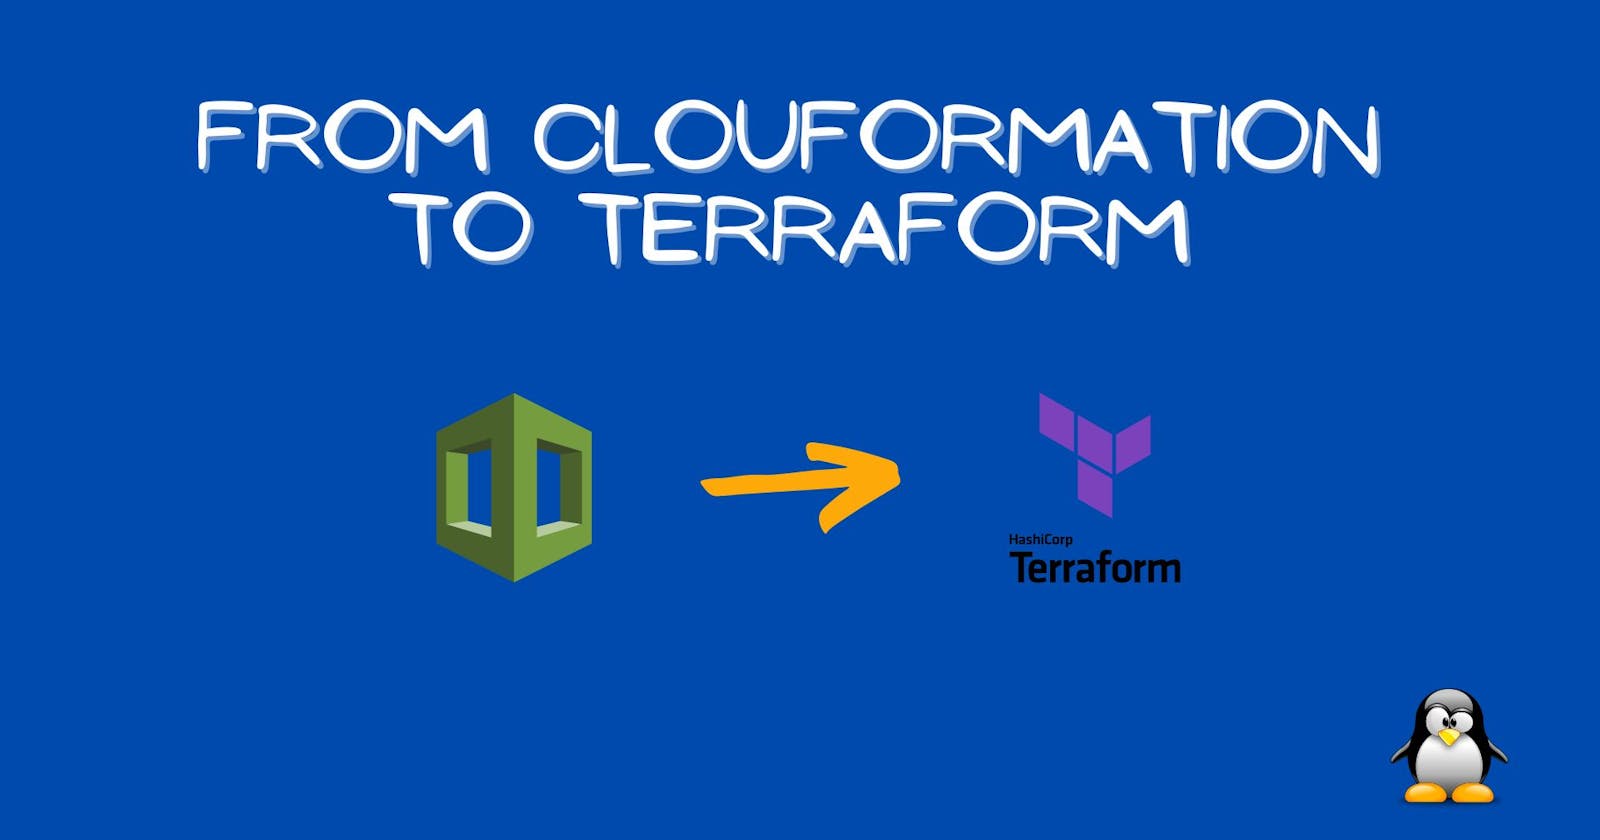 From Cloudformation to Terraform